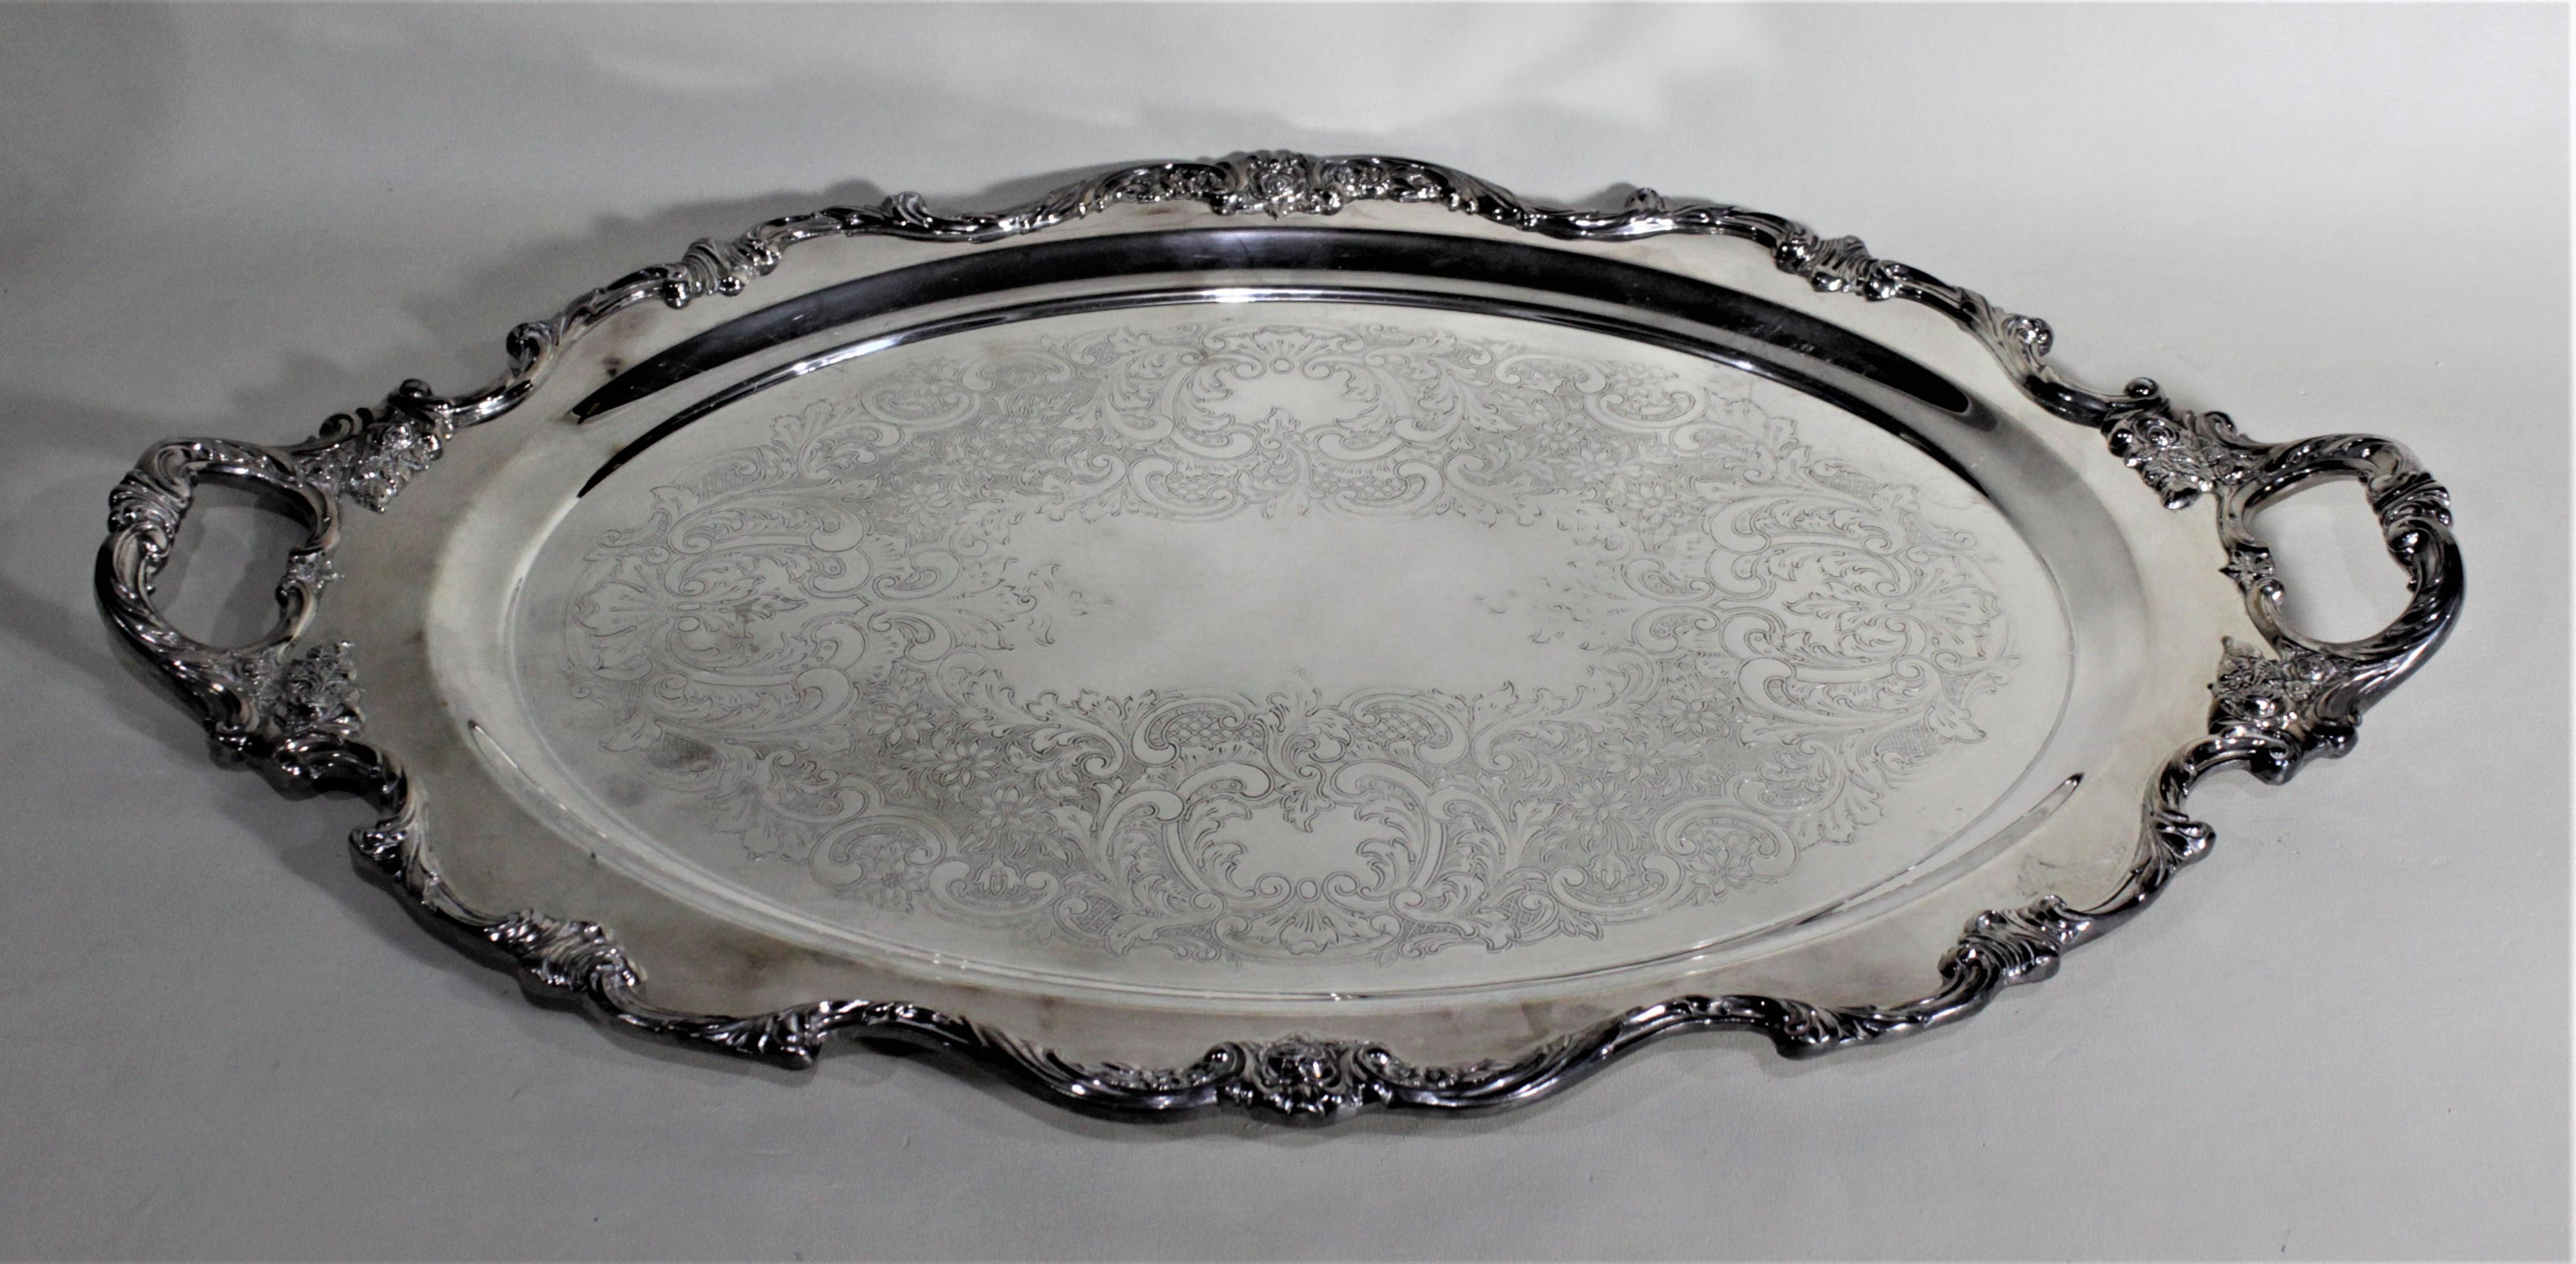 This silver plated serving tray was made by Wallace of the United States in circa 1950 in the Victorian style. This oval tray is done with intricate floral decoration on the sides and handles accented by scrolling leaf and vines. The bottom of the